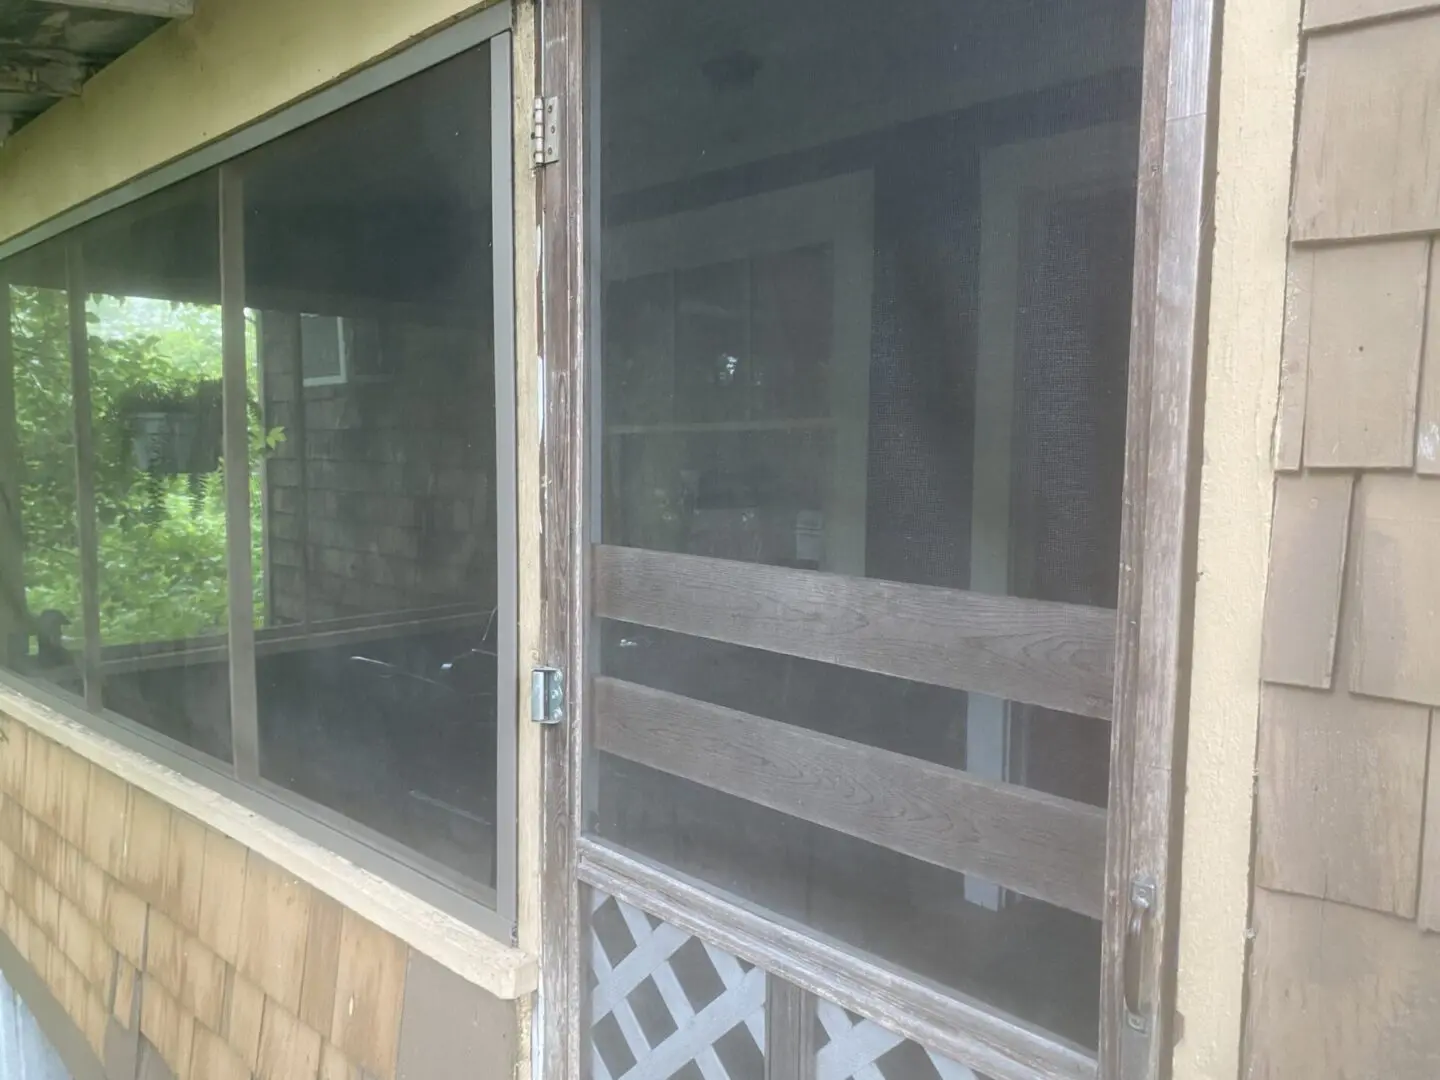 A screen door that is open on the outside of a house.